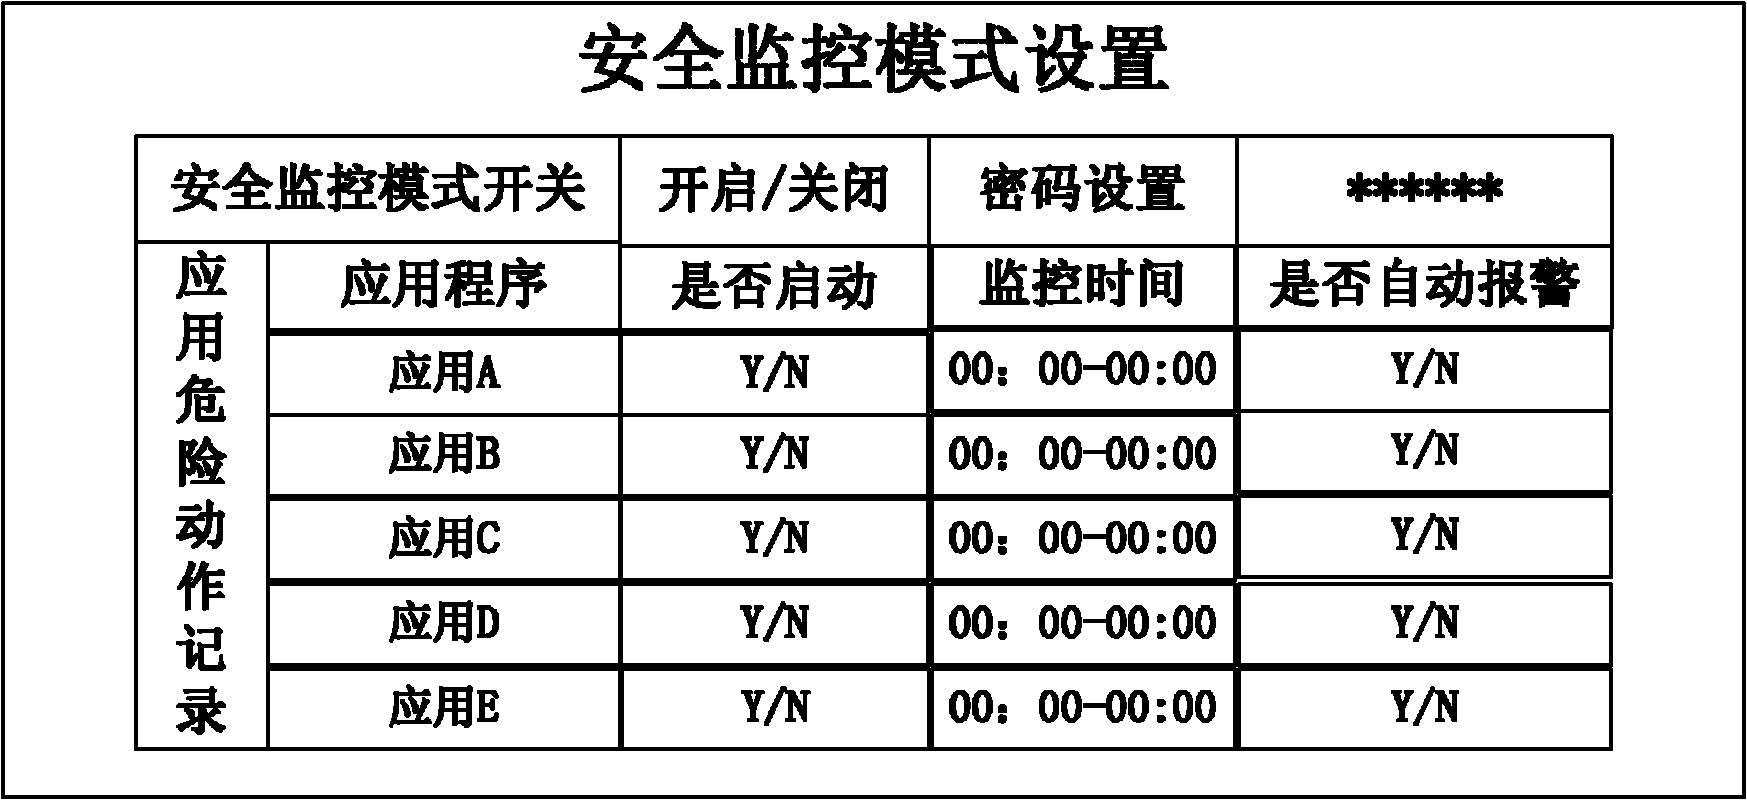 Application program monitoring method and device